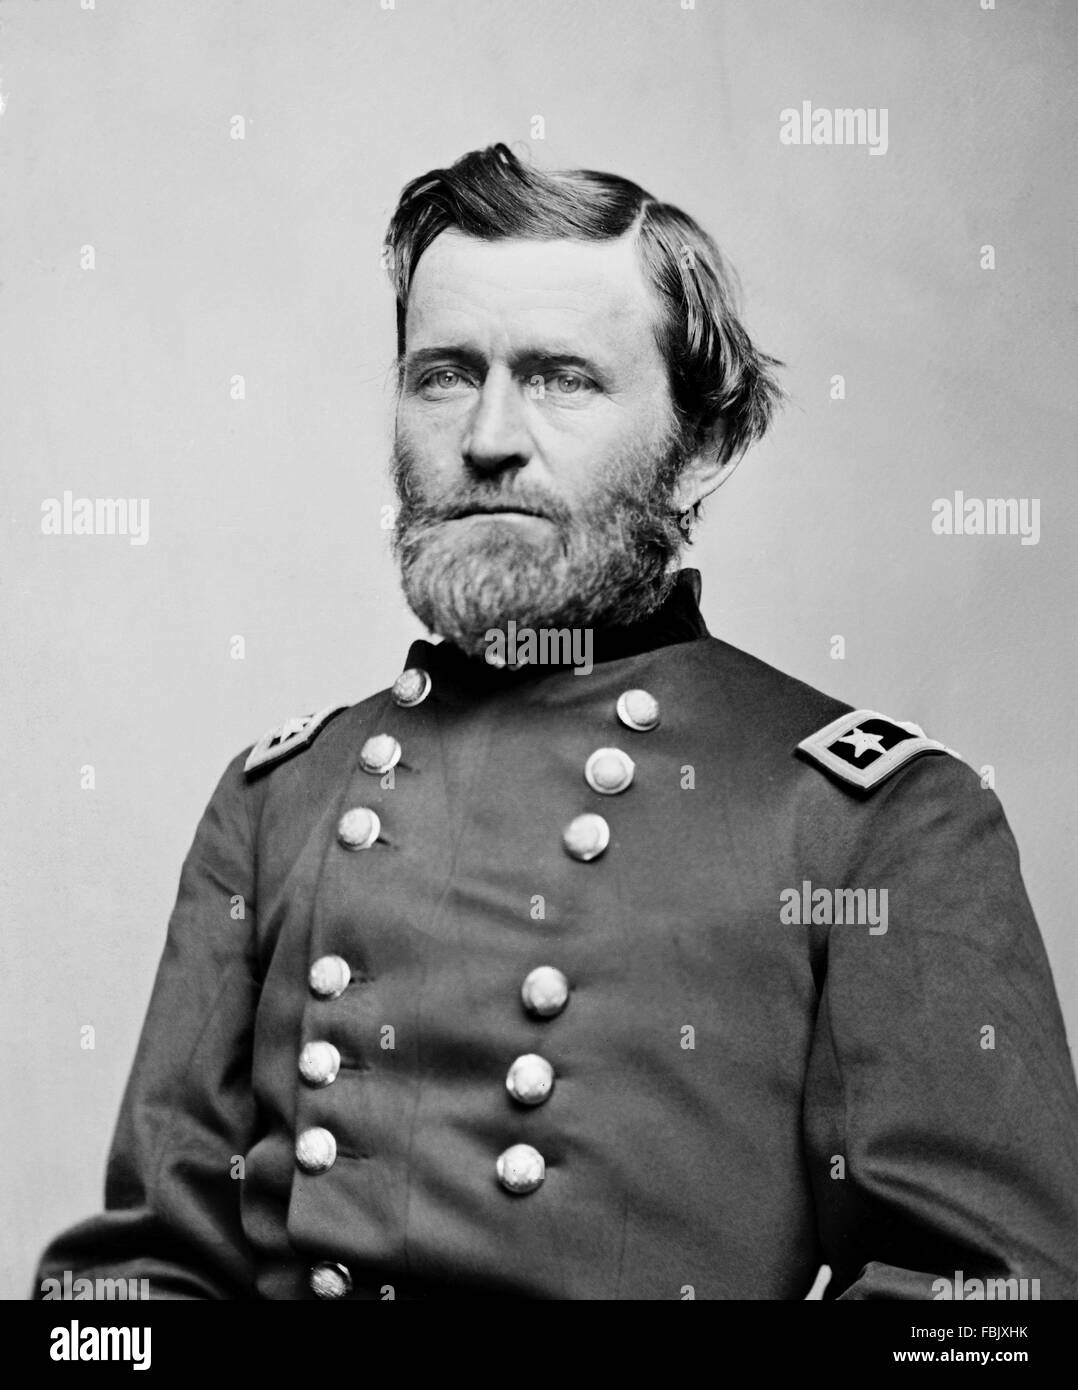 Ulysses S Grant, portrait of the 18th President of the USA, in military uniform, c. 1862-1864 Stock Photo